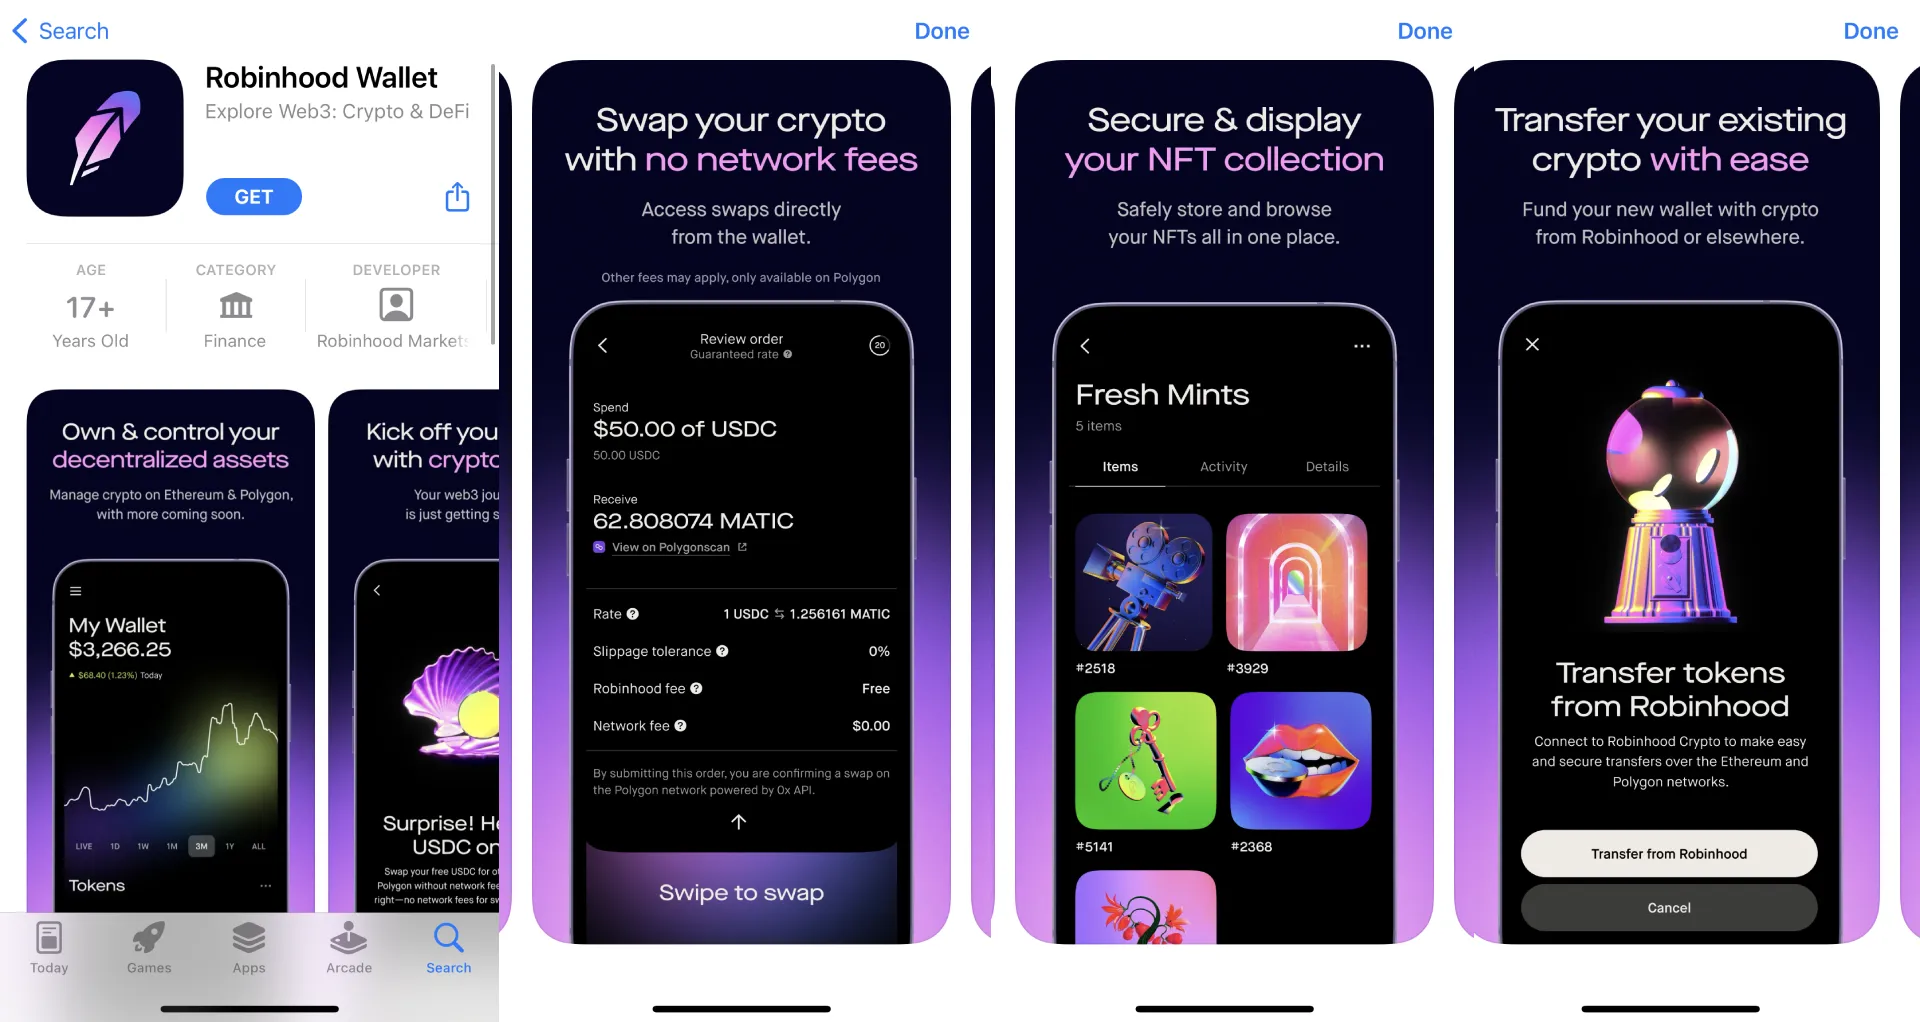 Four screenshots taken from iOS App Store's "Robinhood Wallet" app listing, showing a black and purple color scheme with the wallet's various features.